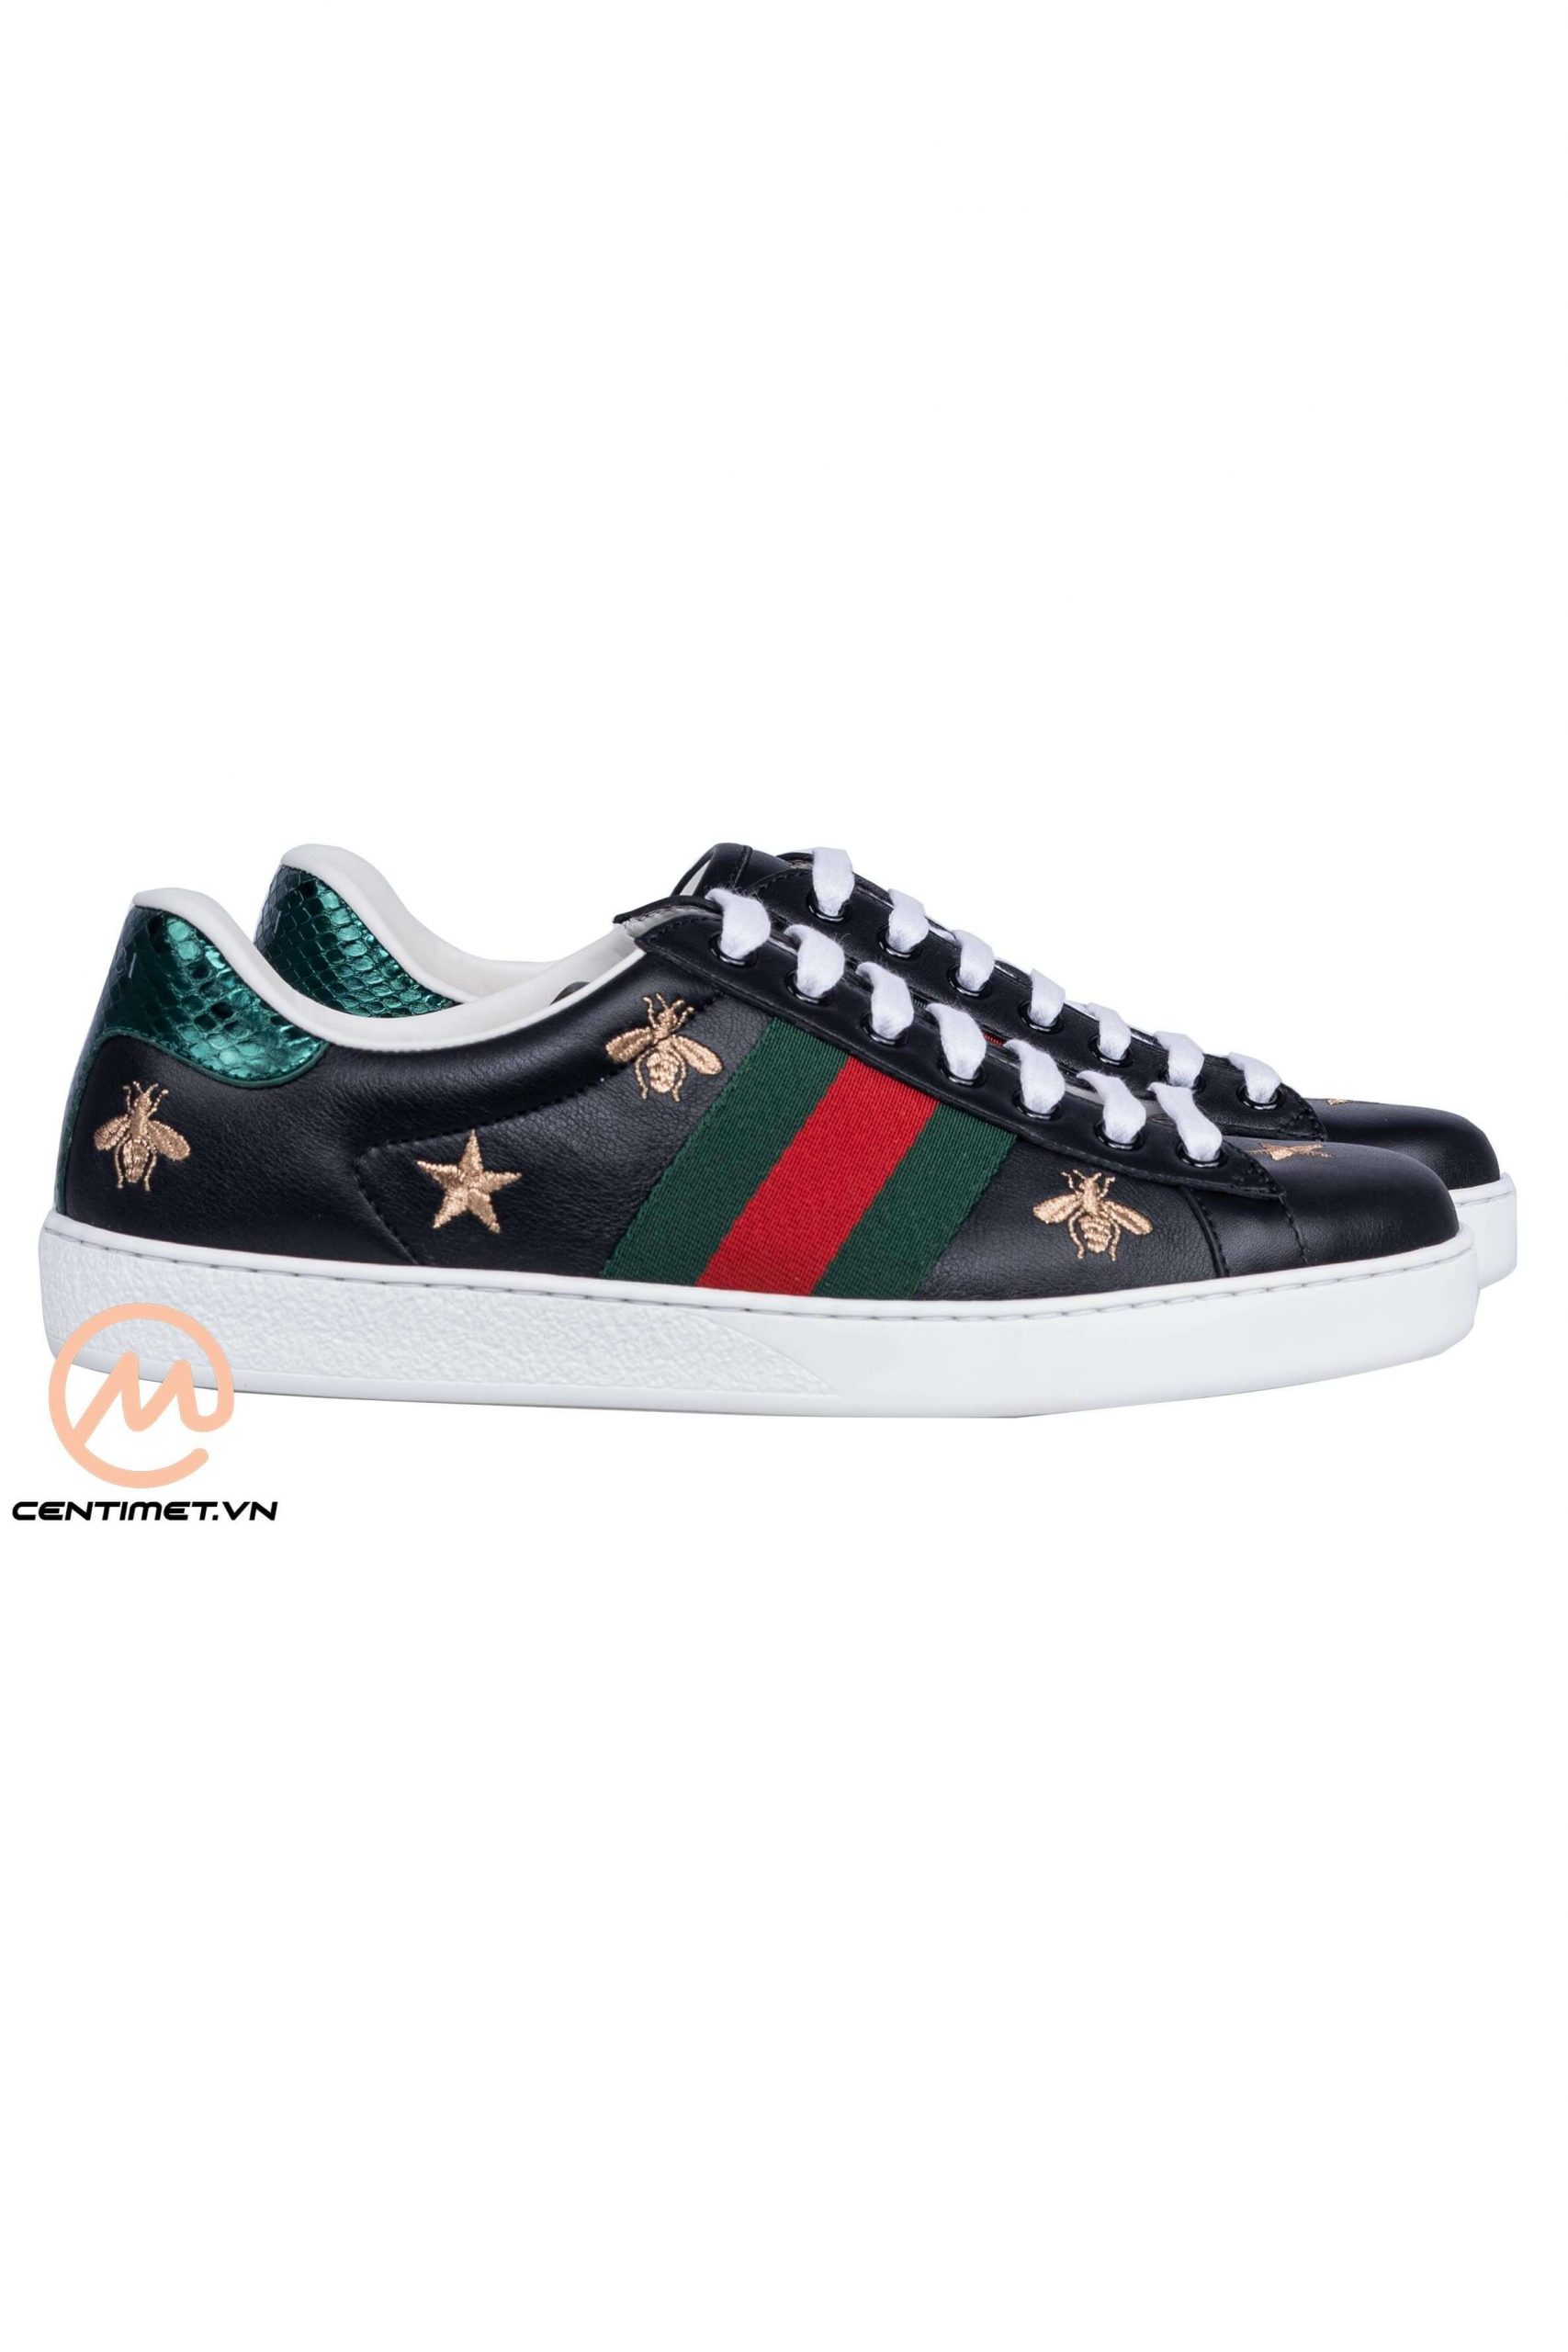 Giày Gucci Ace Sneaker with Bees & Stars Black Edition05388-Edit